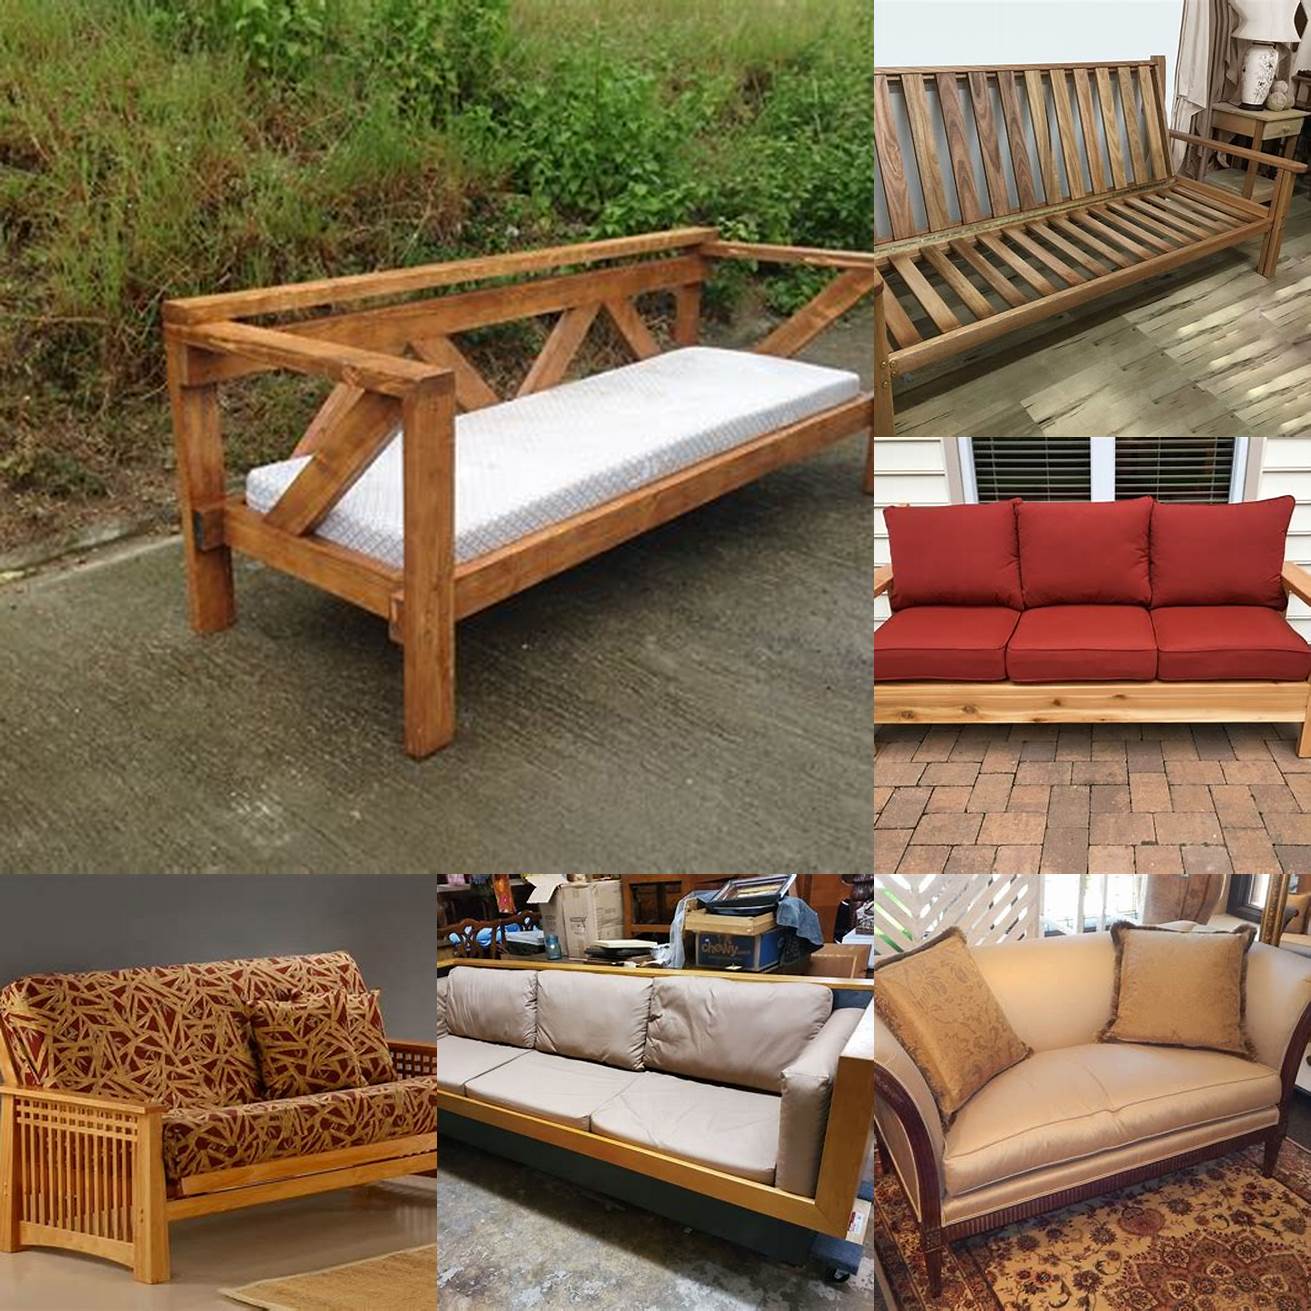 Image of the sofas sturdy wooden frame